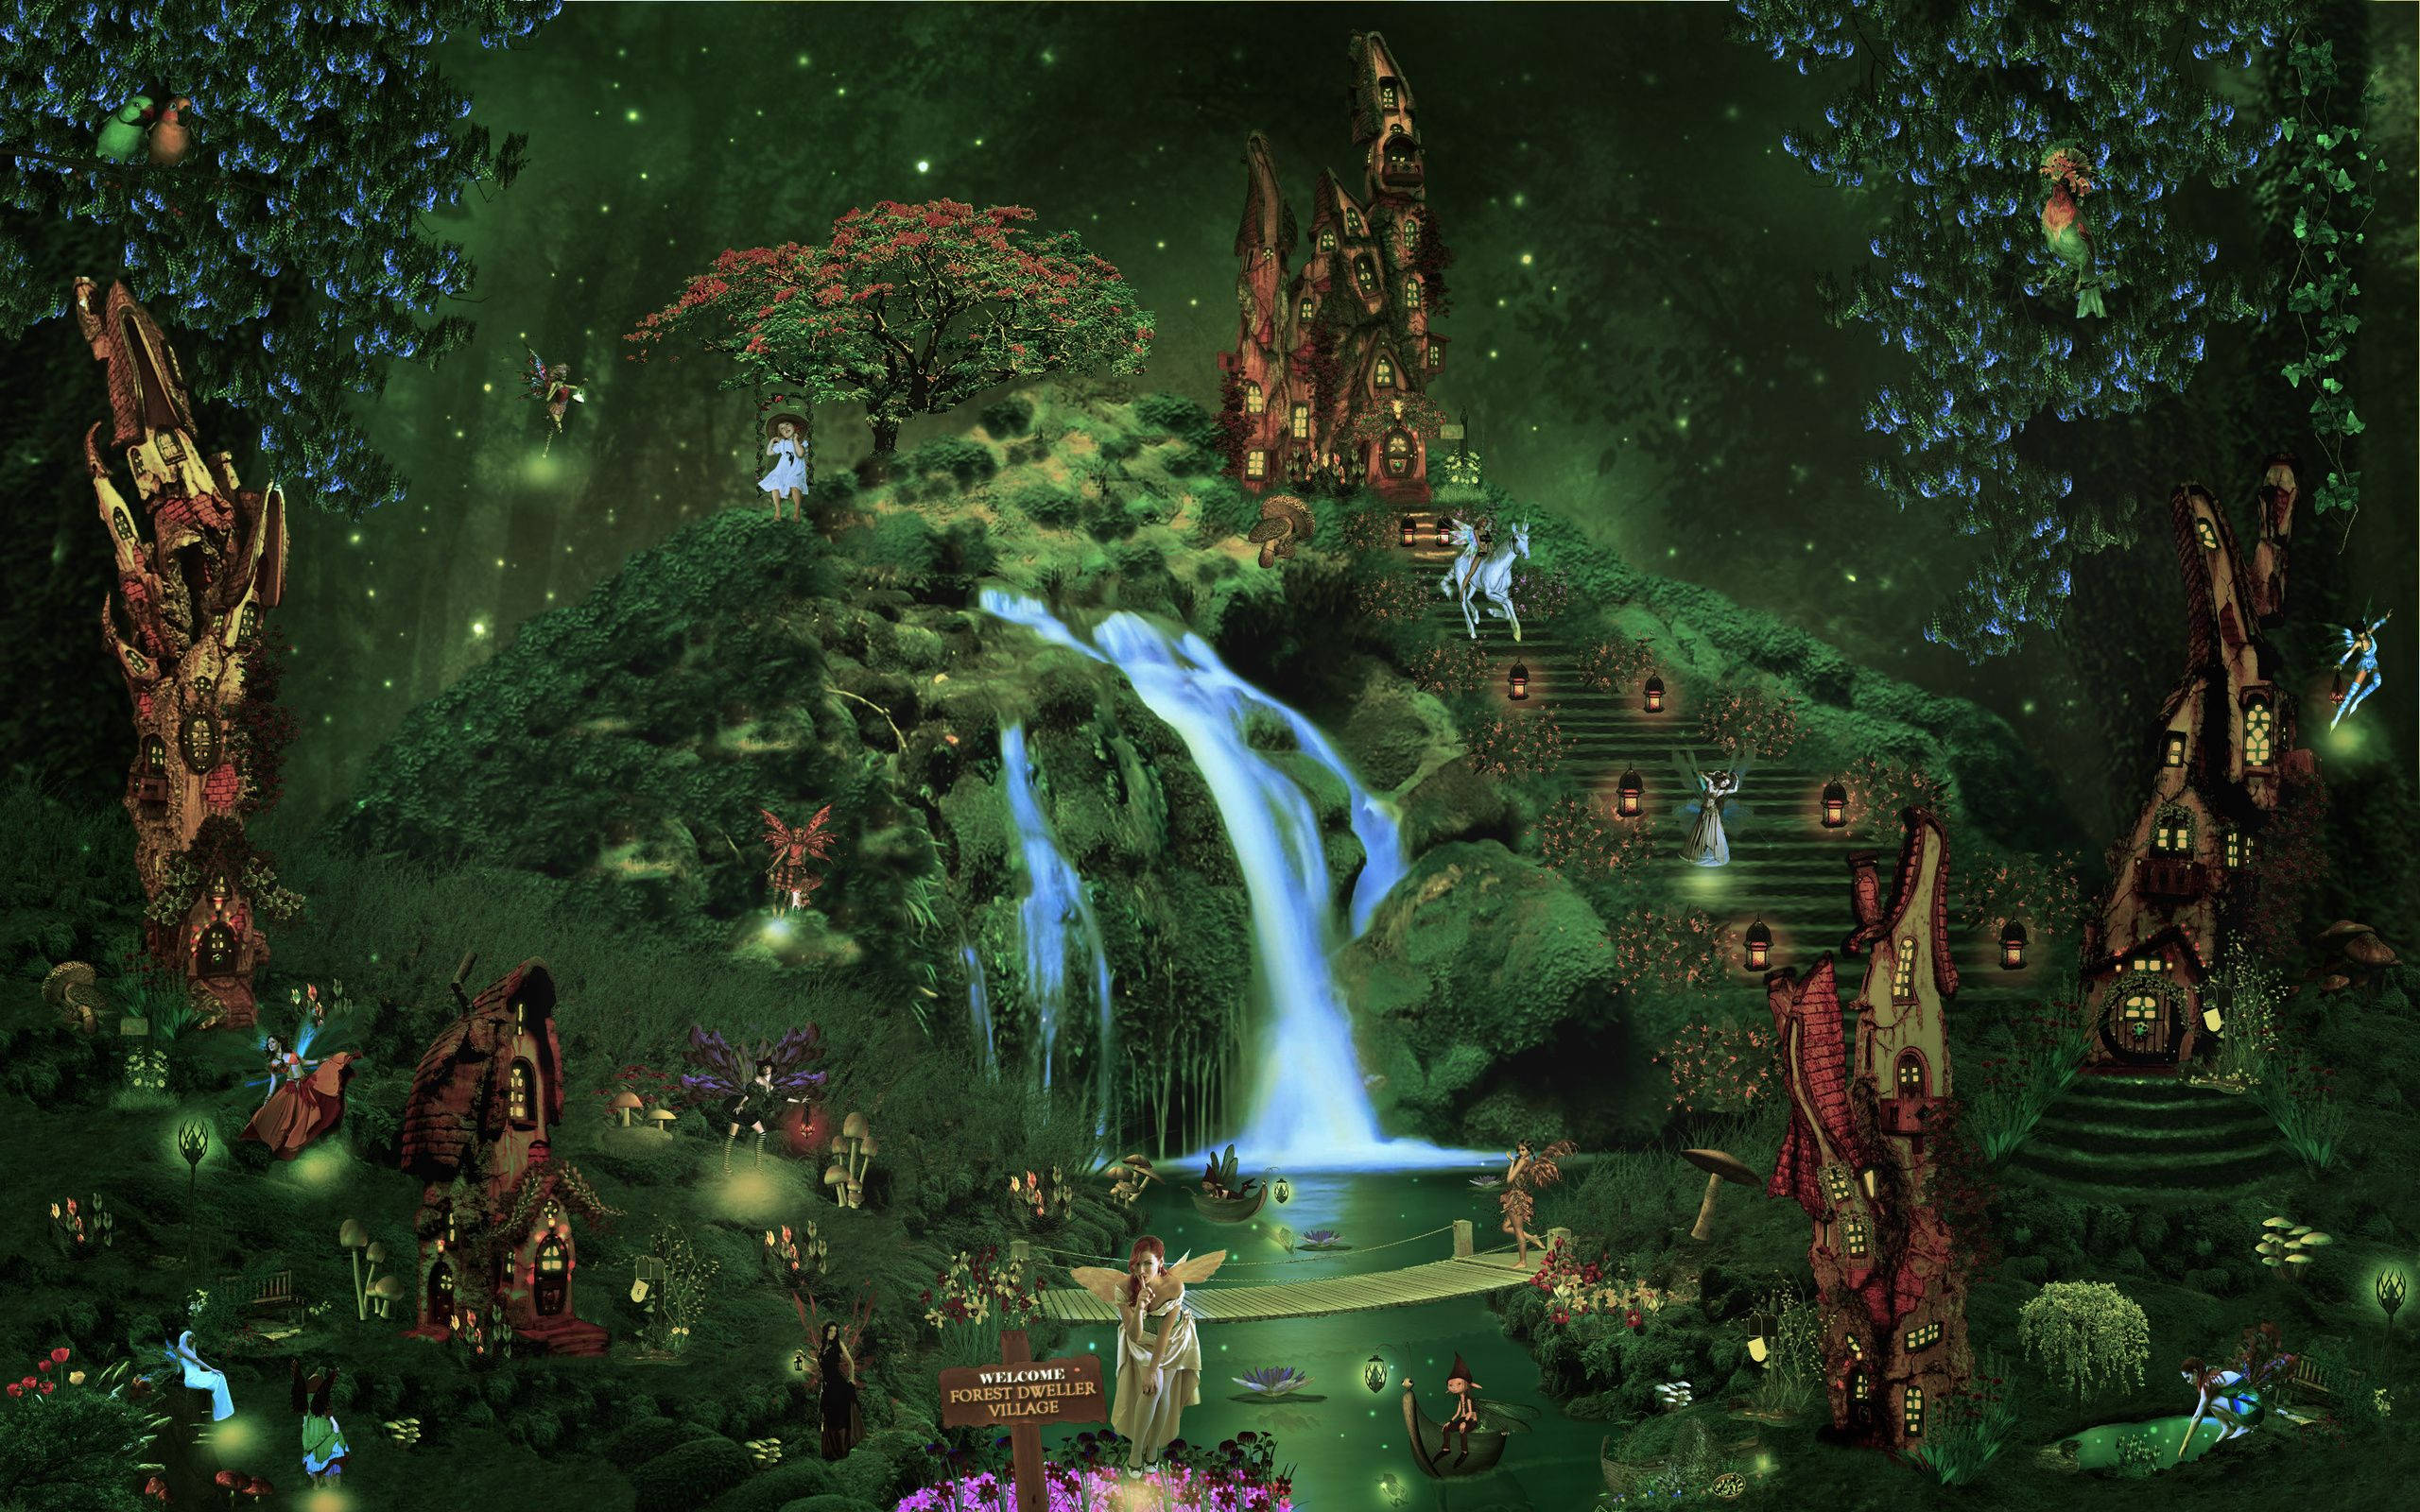 Enchanted Forest Fairy Village Background